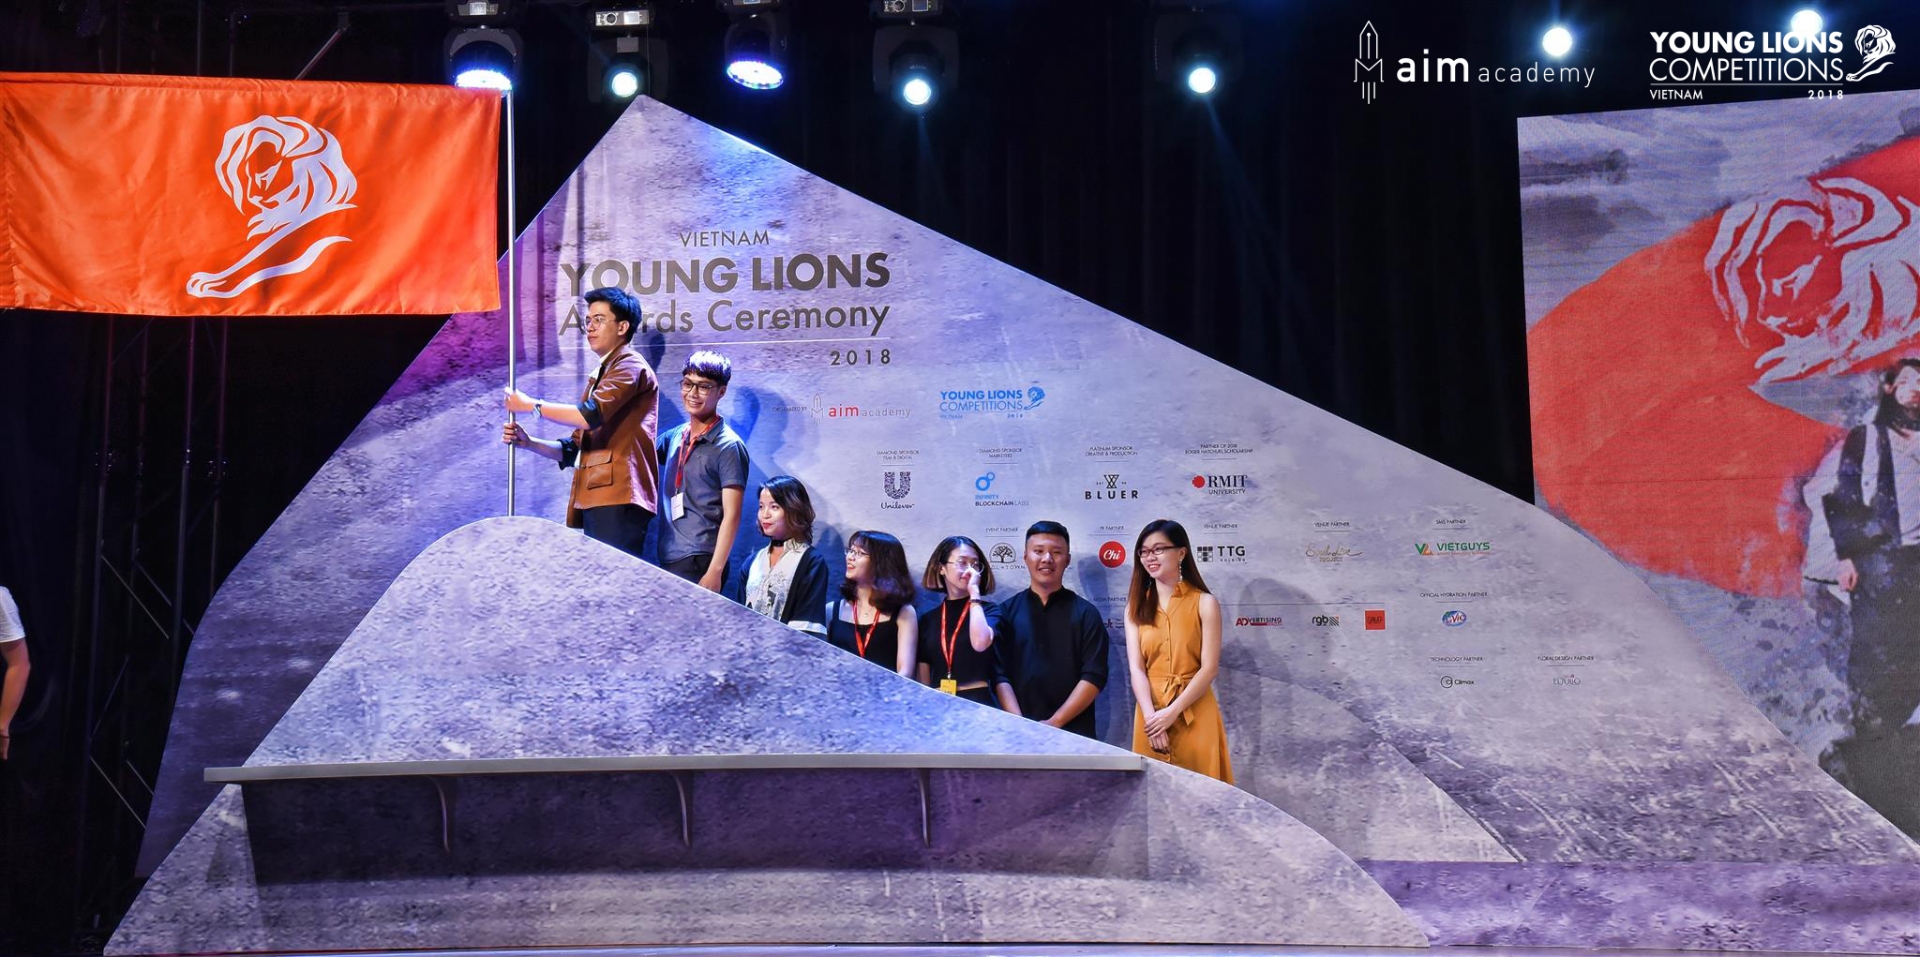 Vietnam Young Lions 2018 winners announced